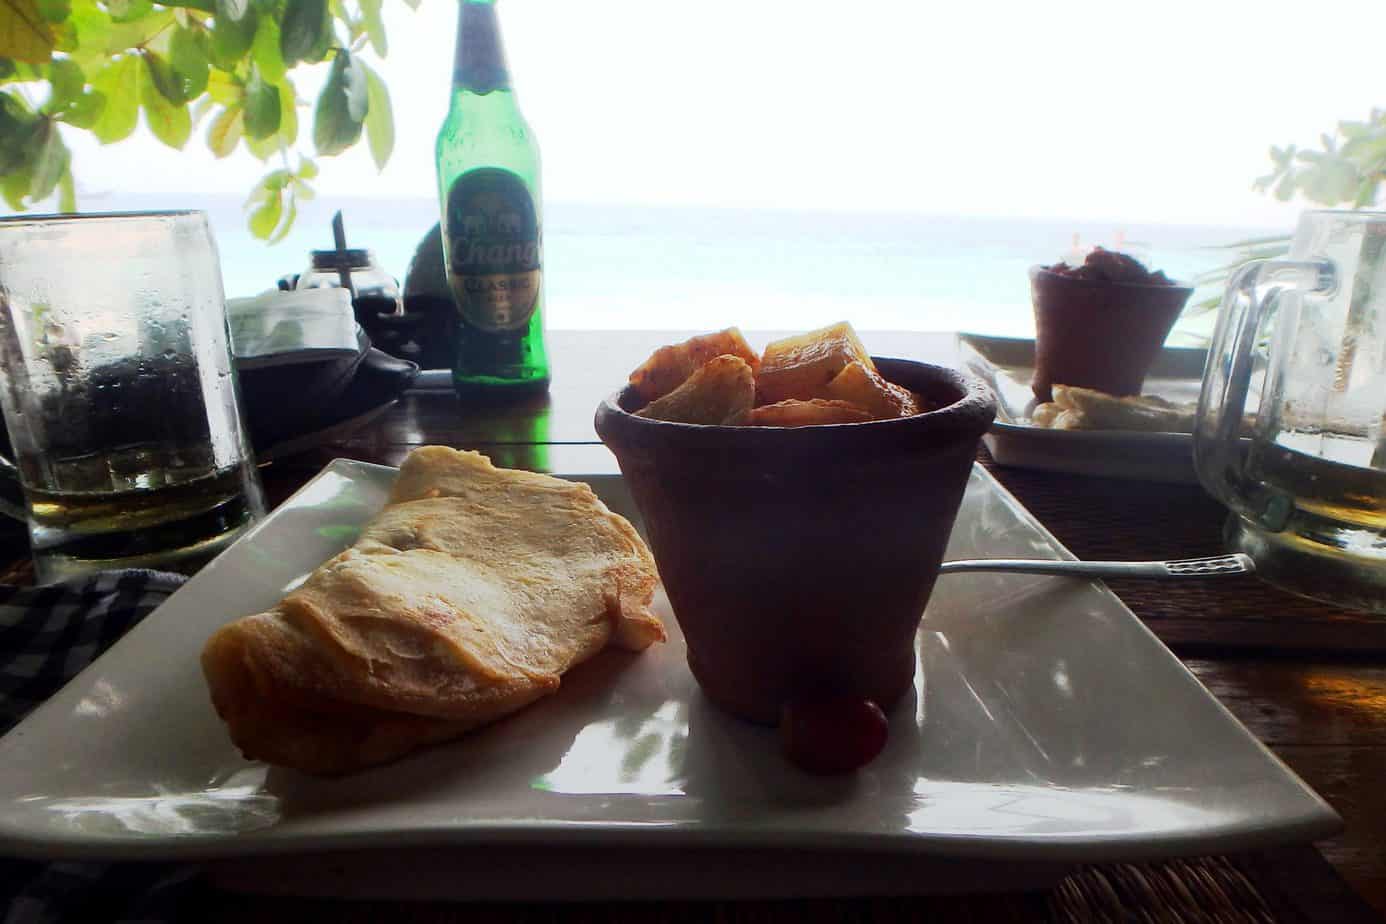 A plate of food with a green bottle behind it can be seen with water in the distance.